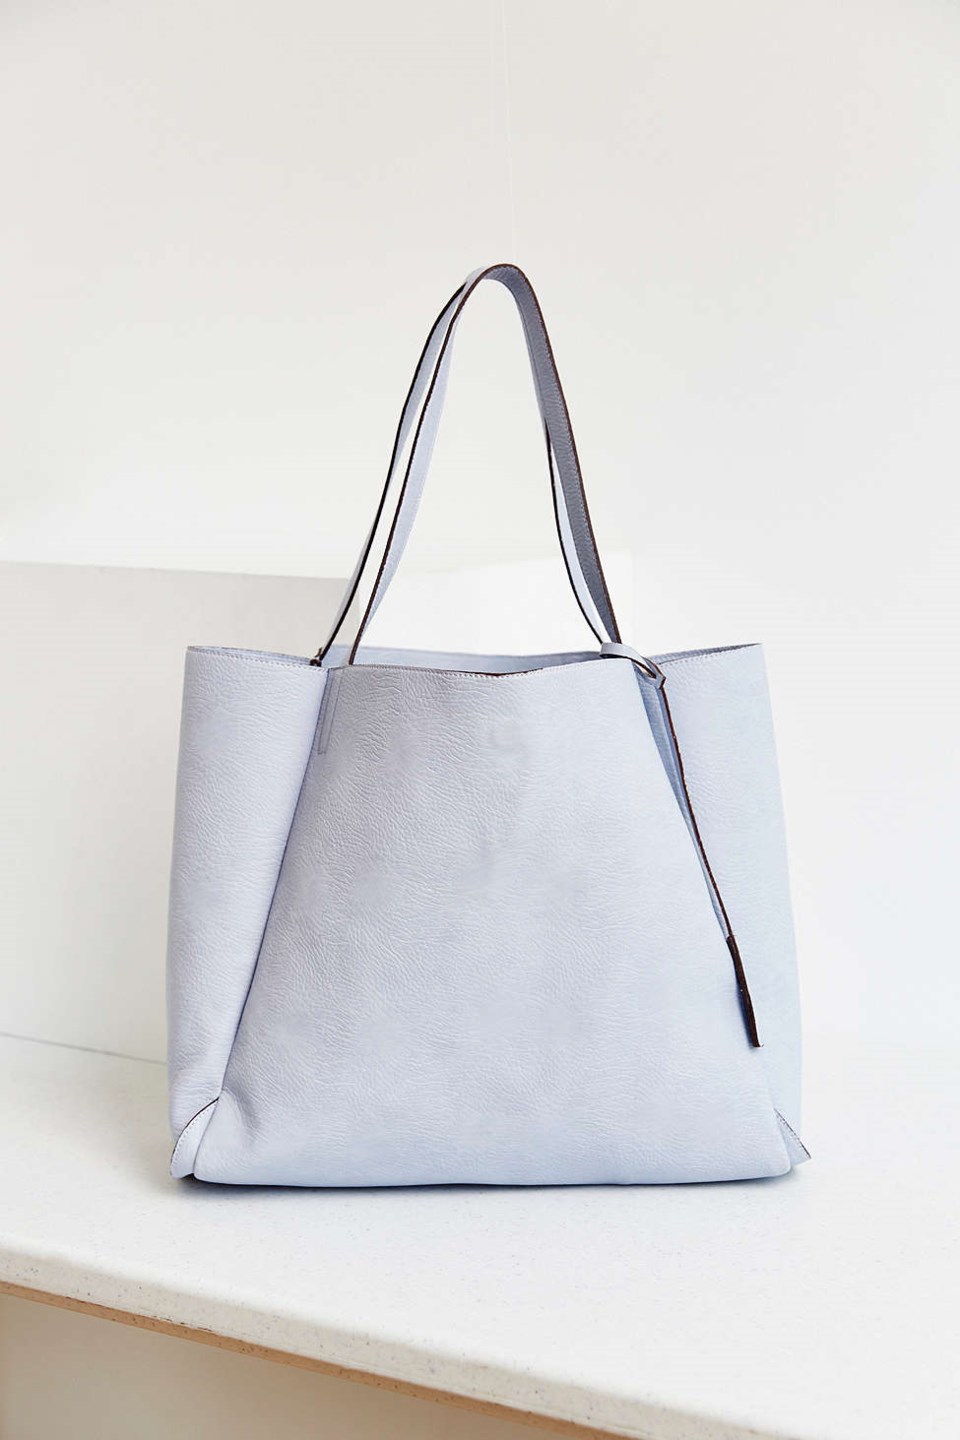 Silence and Noise Modern Tote Bag from Urban Outfitters $49